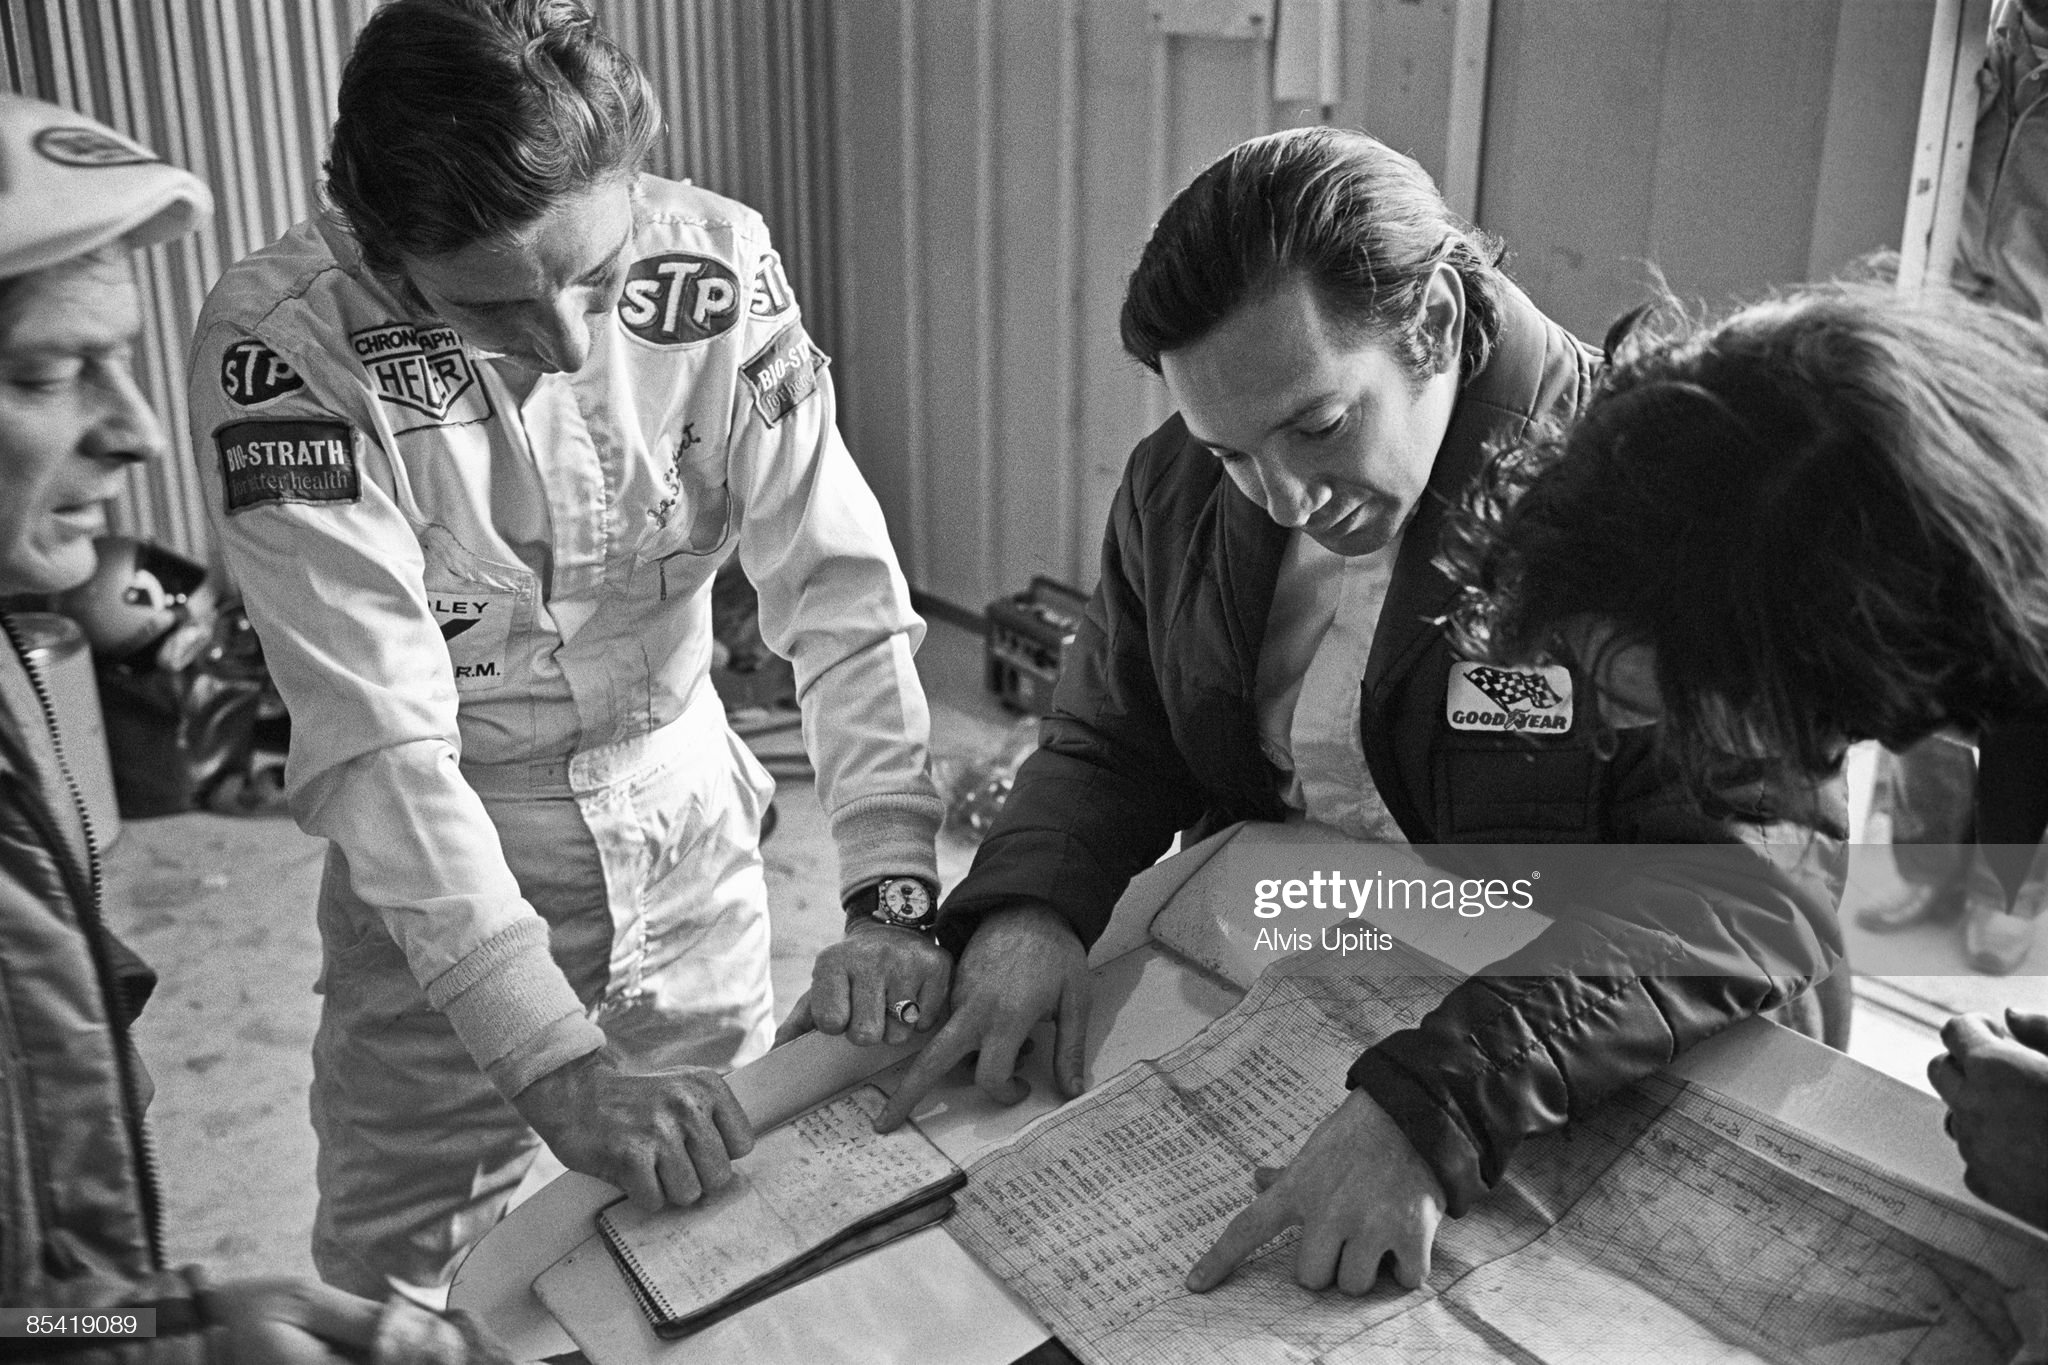 Pedro Rodriguez, right, studies gear charts with fellow Brabham driver Jo Siffert and mechanic.